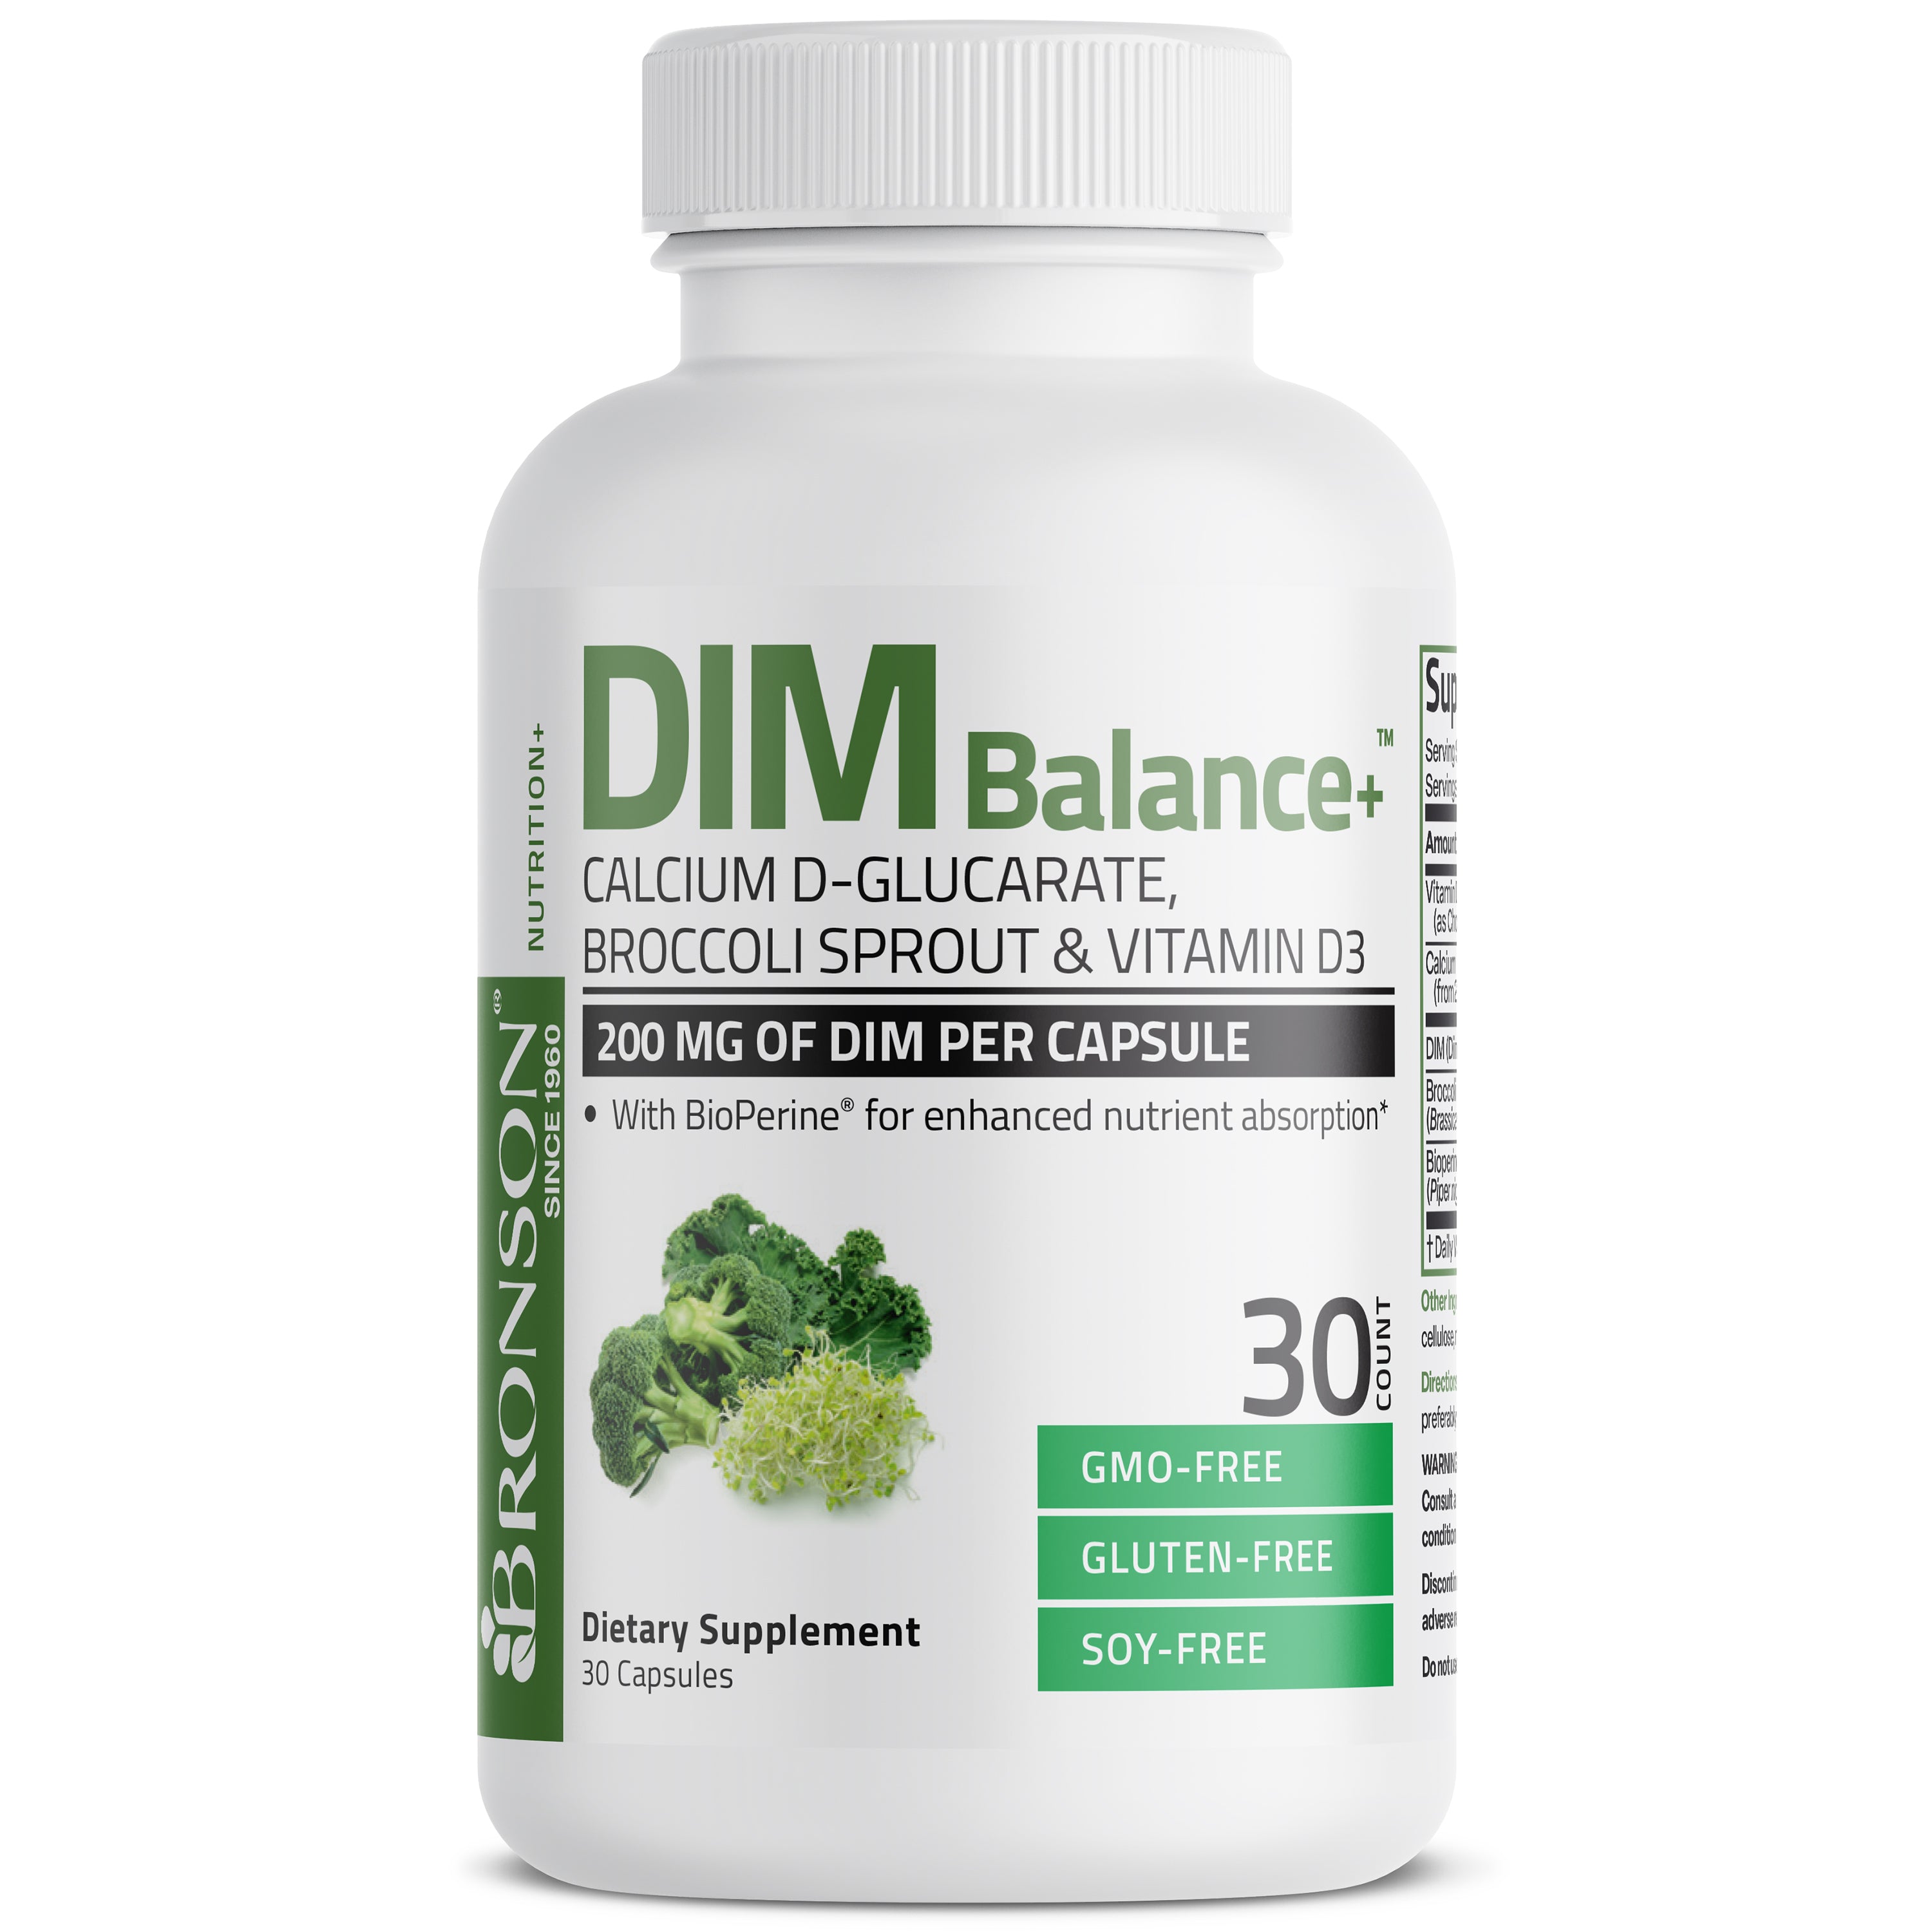 DIM Balance+ Calcium D-Glucarate, Broccoli Sprouts and Vitamin D3 200 MG view 5 of 4